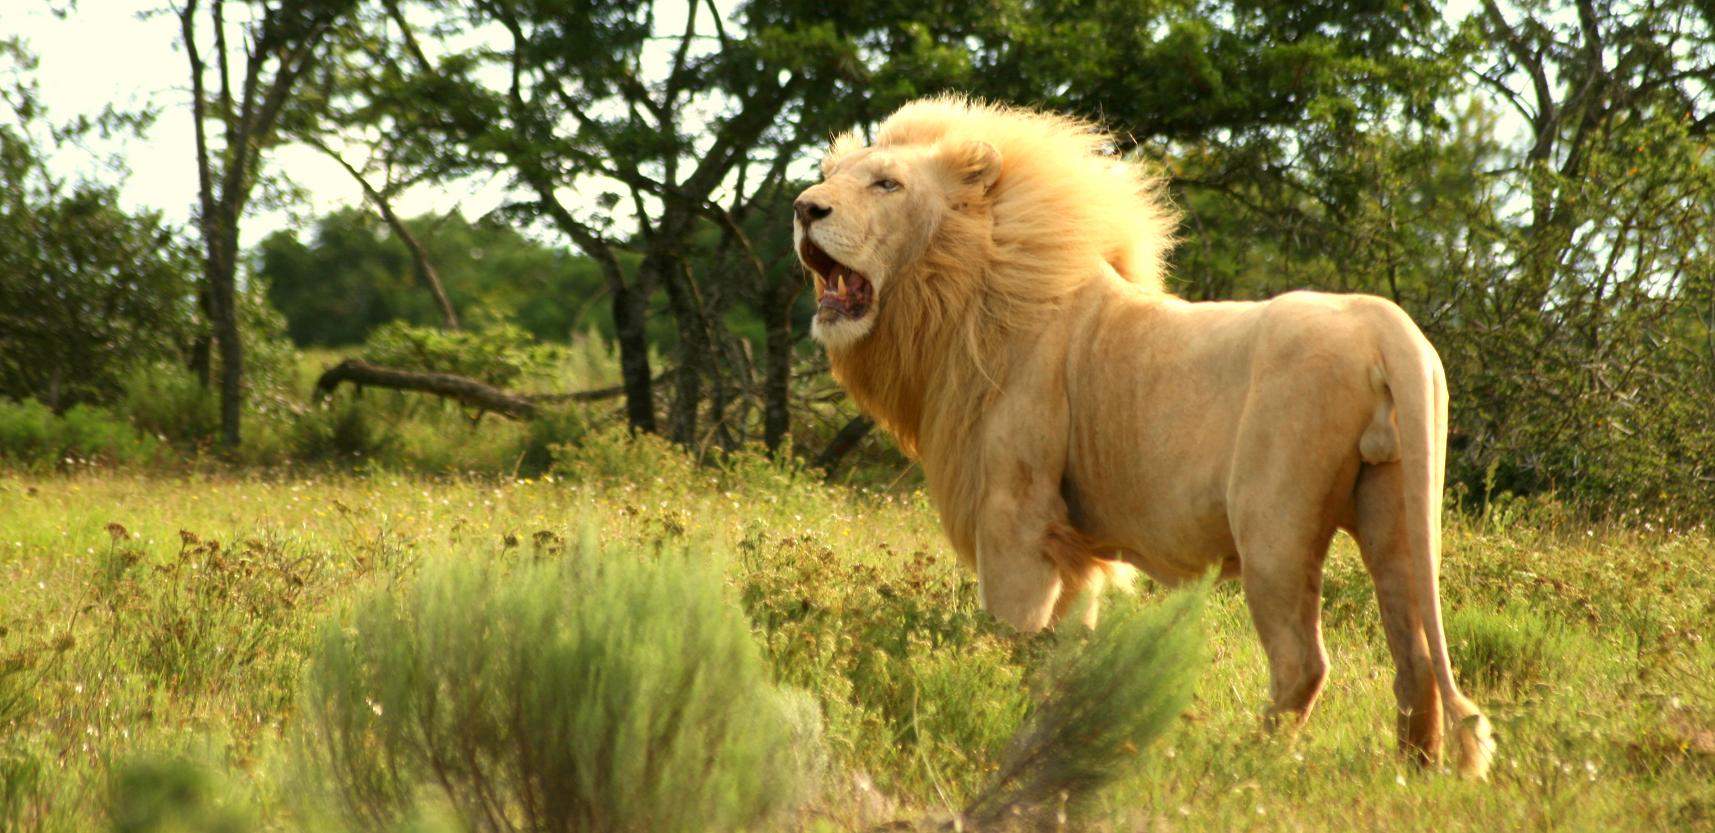 European nations urged to protect African lions